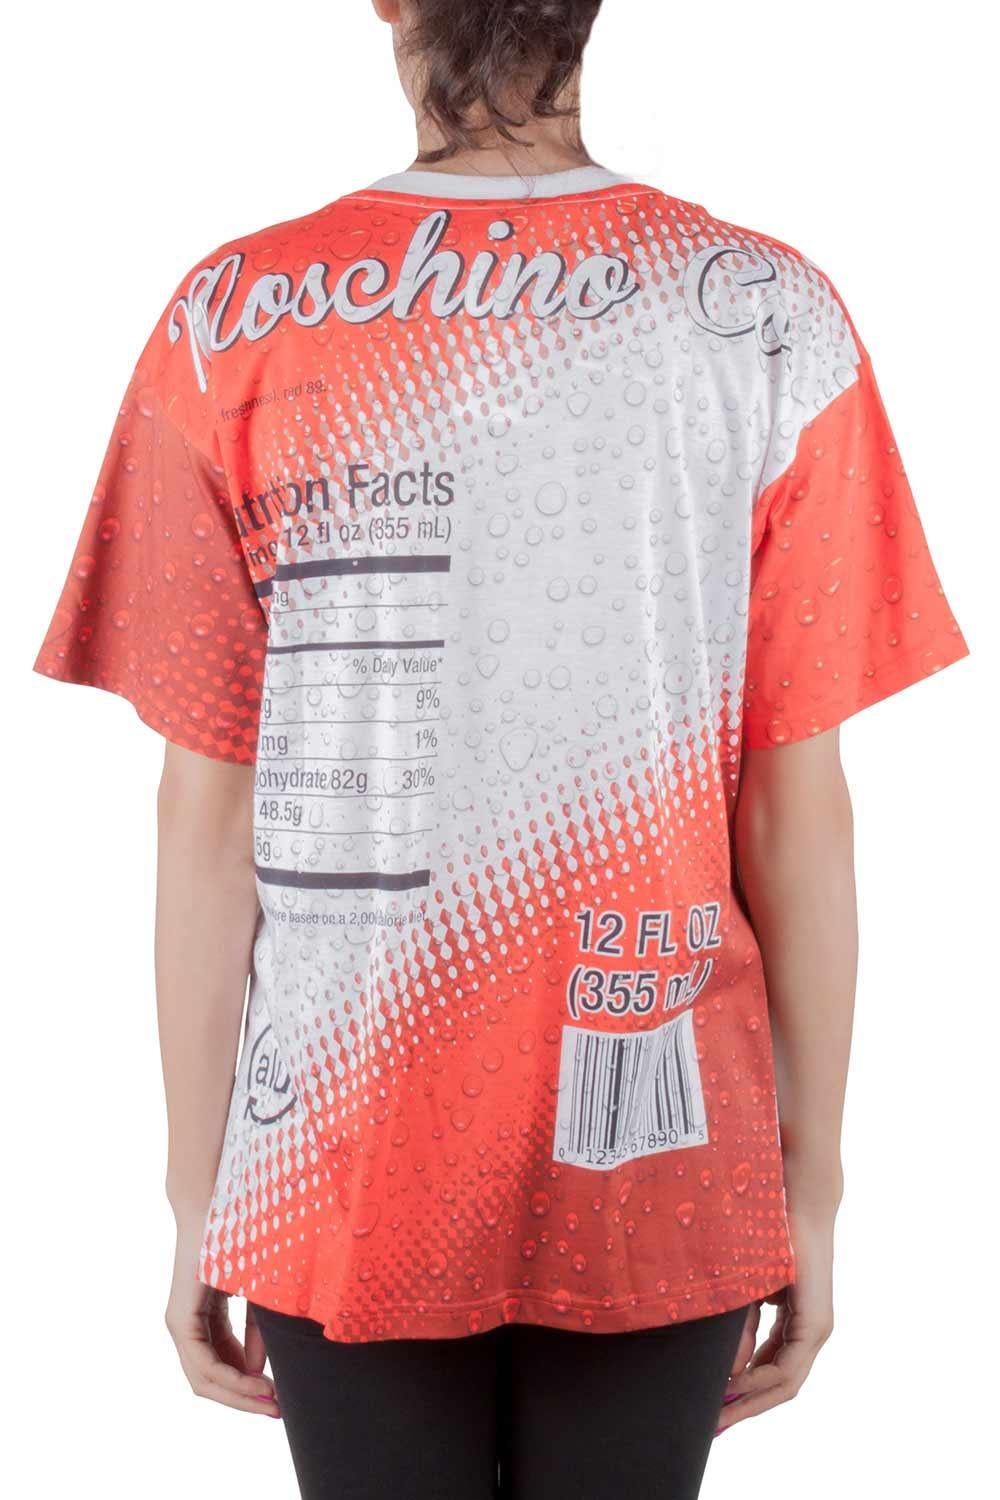 This oversized T-Shirt is made by Moschino featuring a soda print. The red color piece will go well with jeans and sneakers. Tailored from cotton, it provides great comfort. Stay cool these summers with this casual wear.

Includes: The Luxury Closet